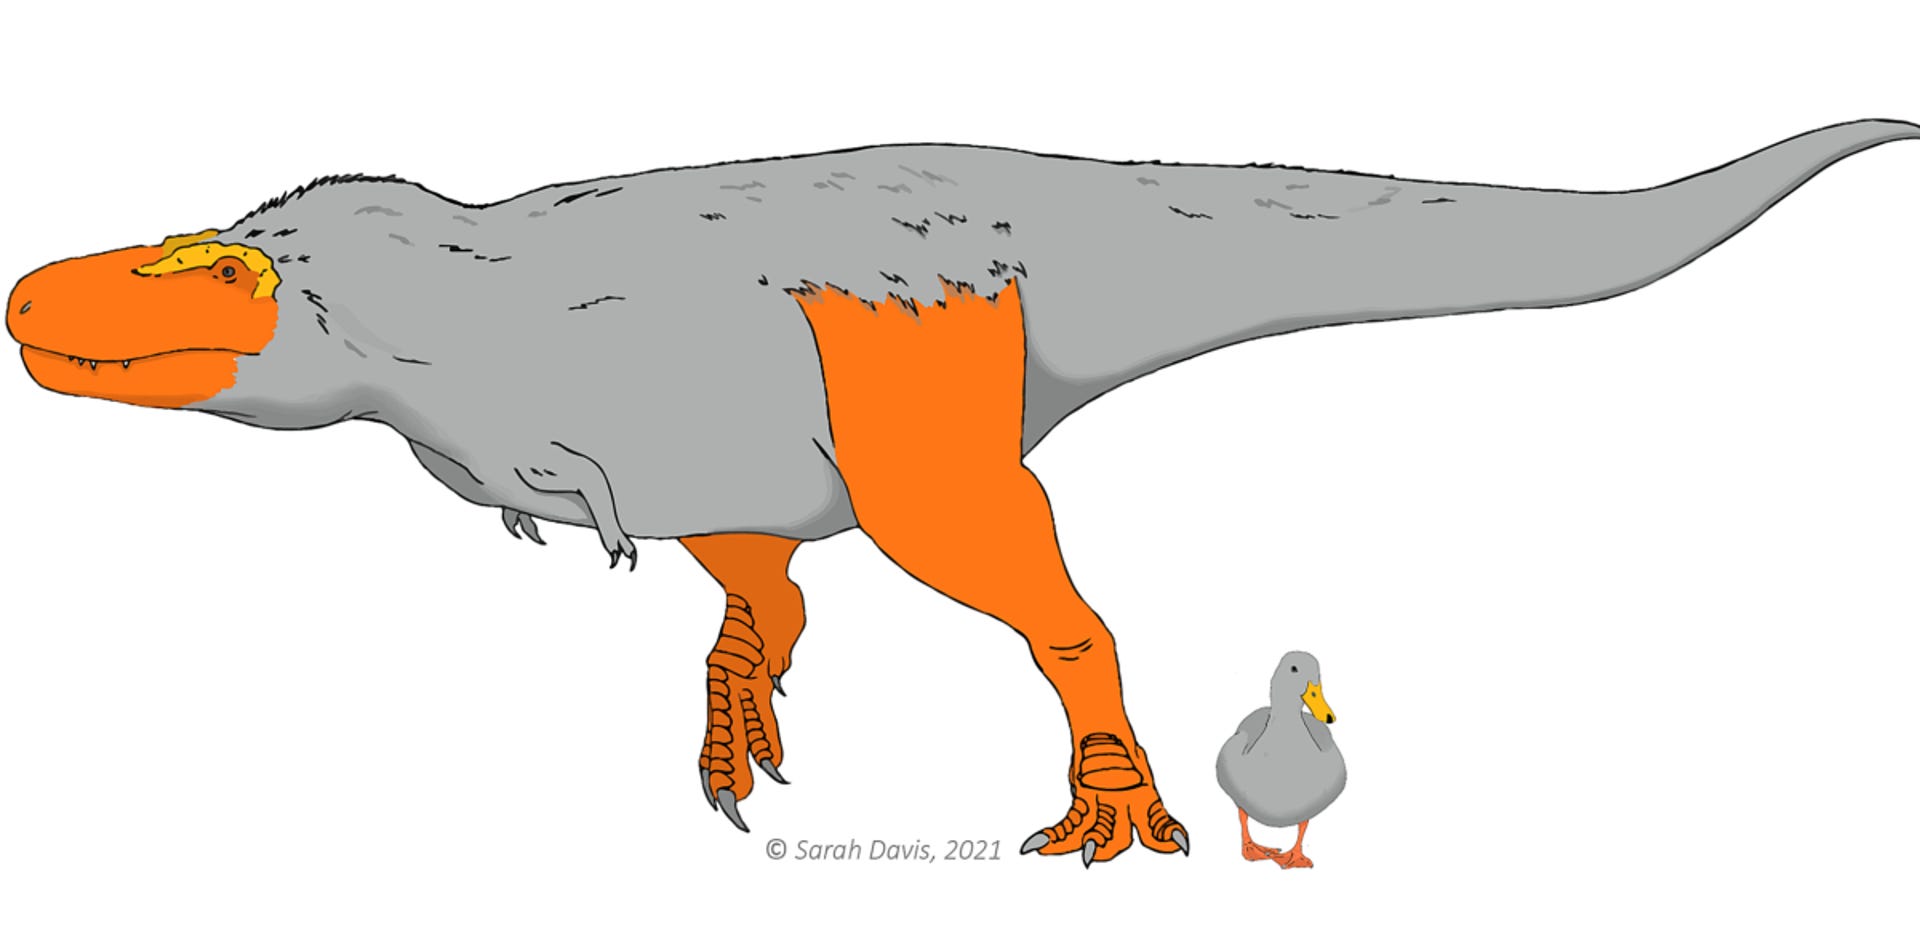 duck-and-dino-web-1-1200x800-c-default.png